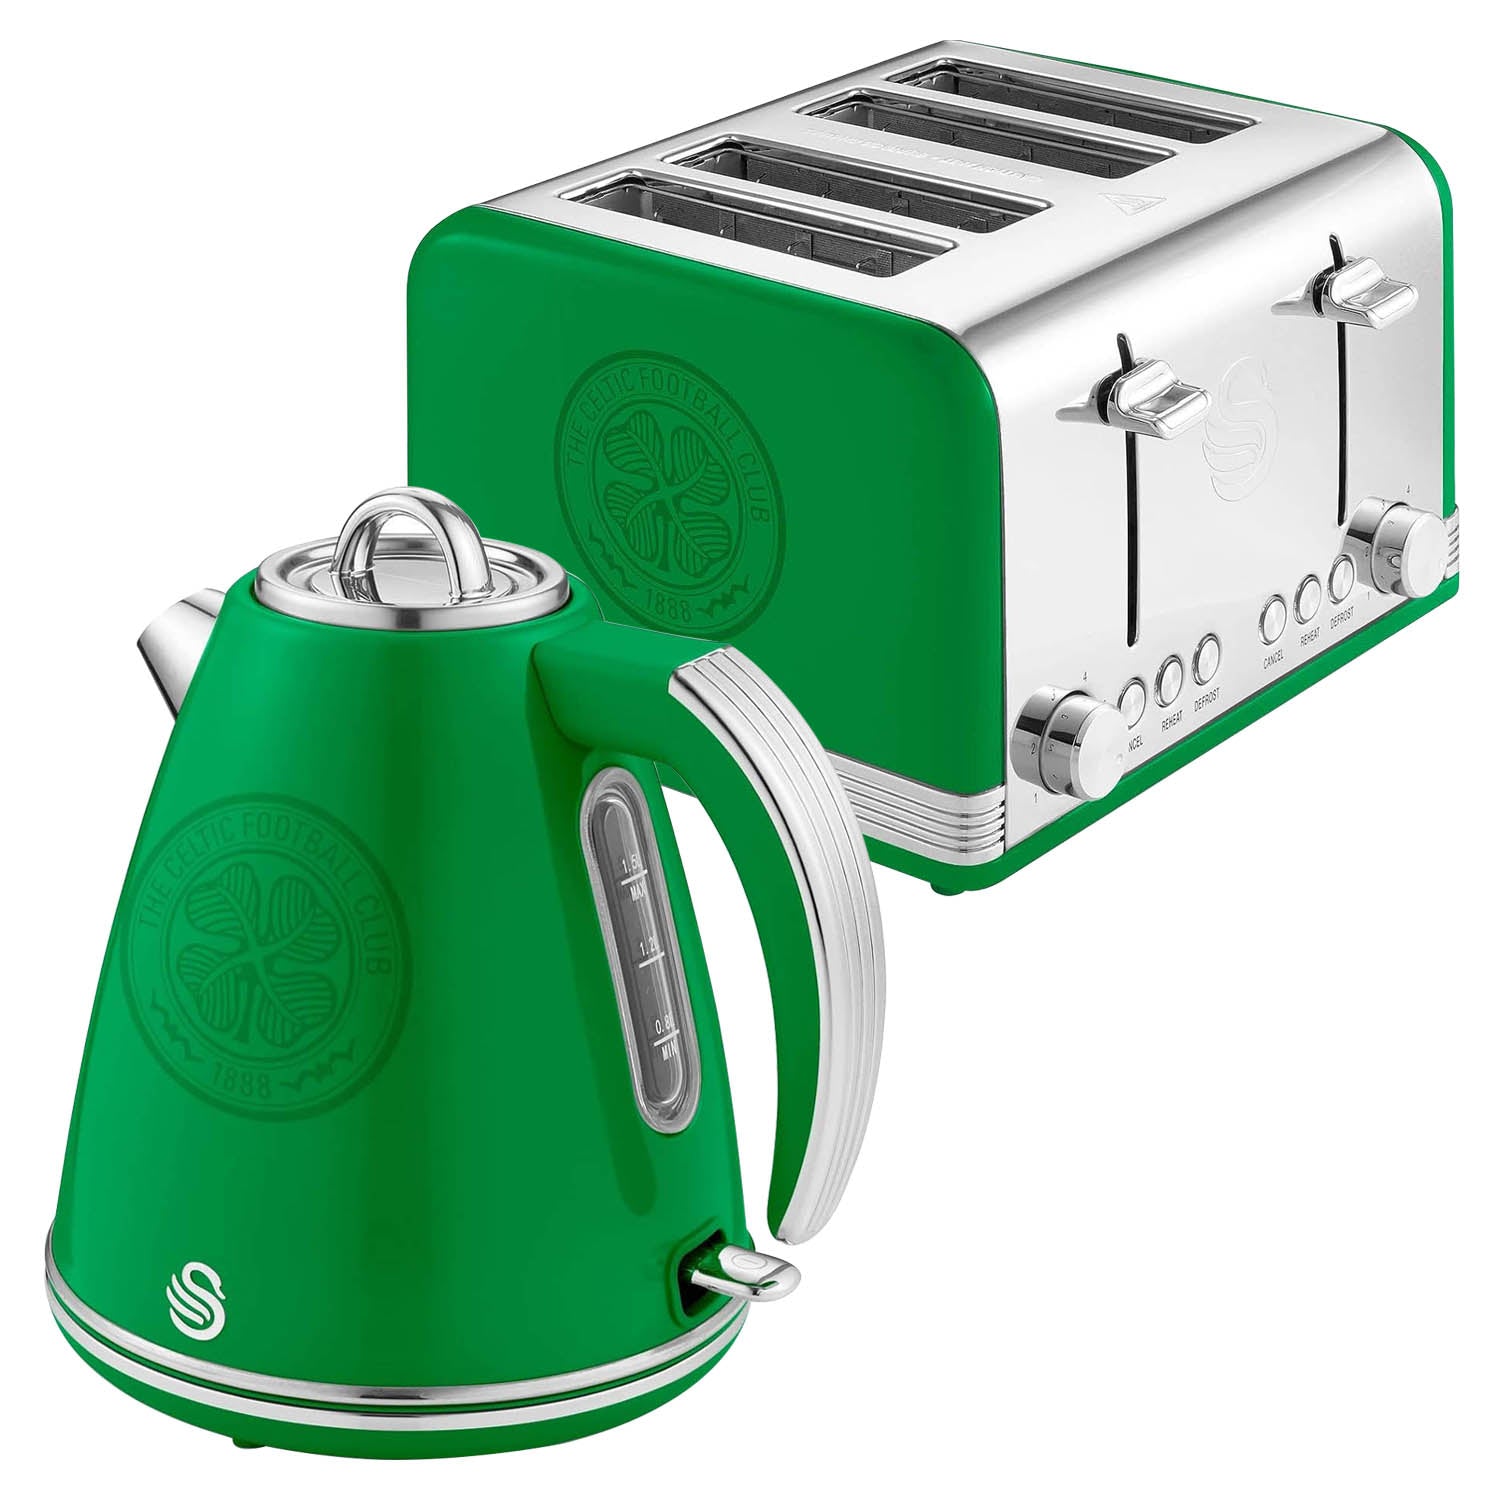 Swan Official Celtic FC Green 1.5L Electric Kettle & 4 Slice Toaster